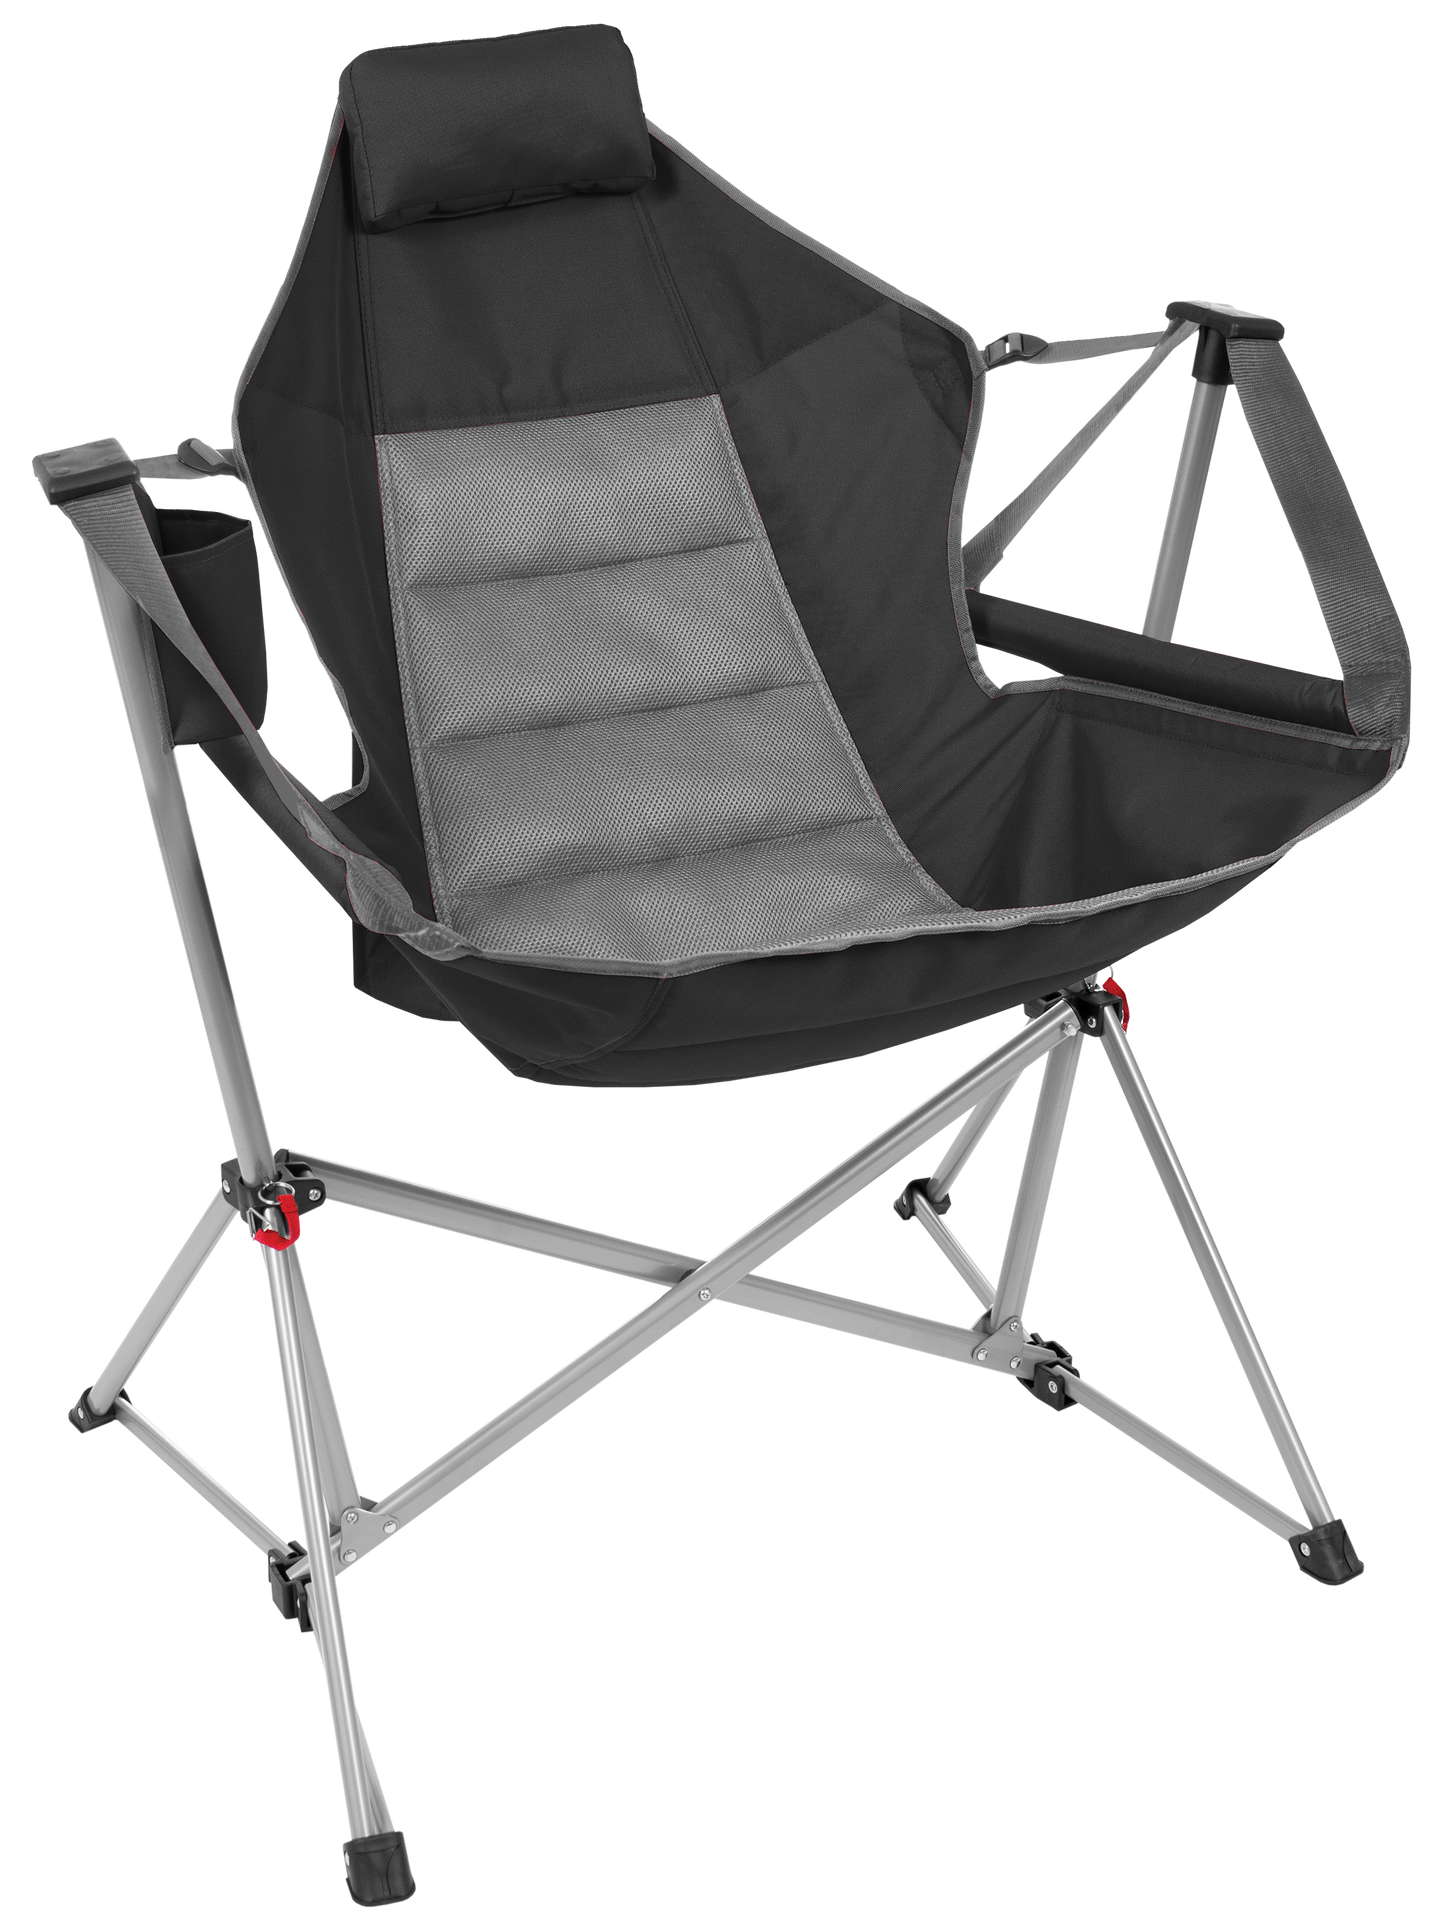 Adult Swing Lounger